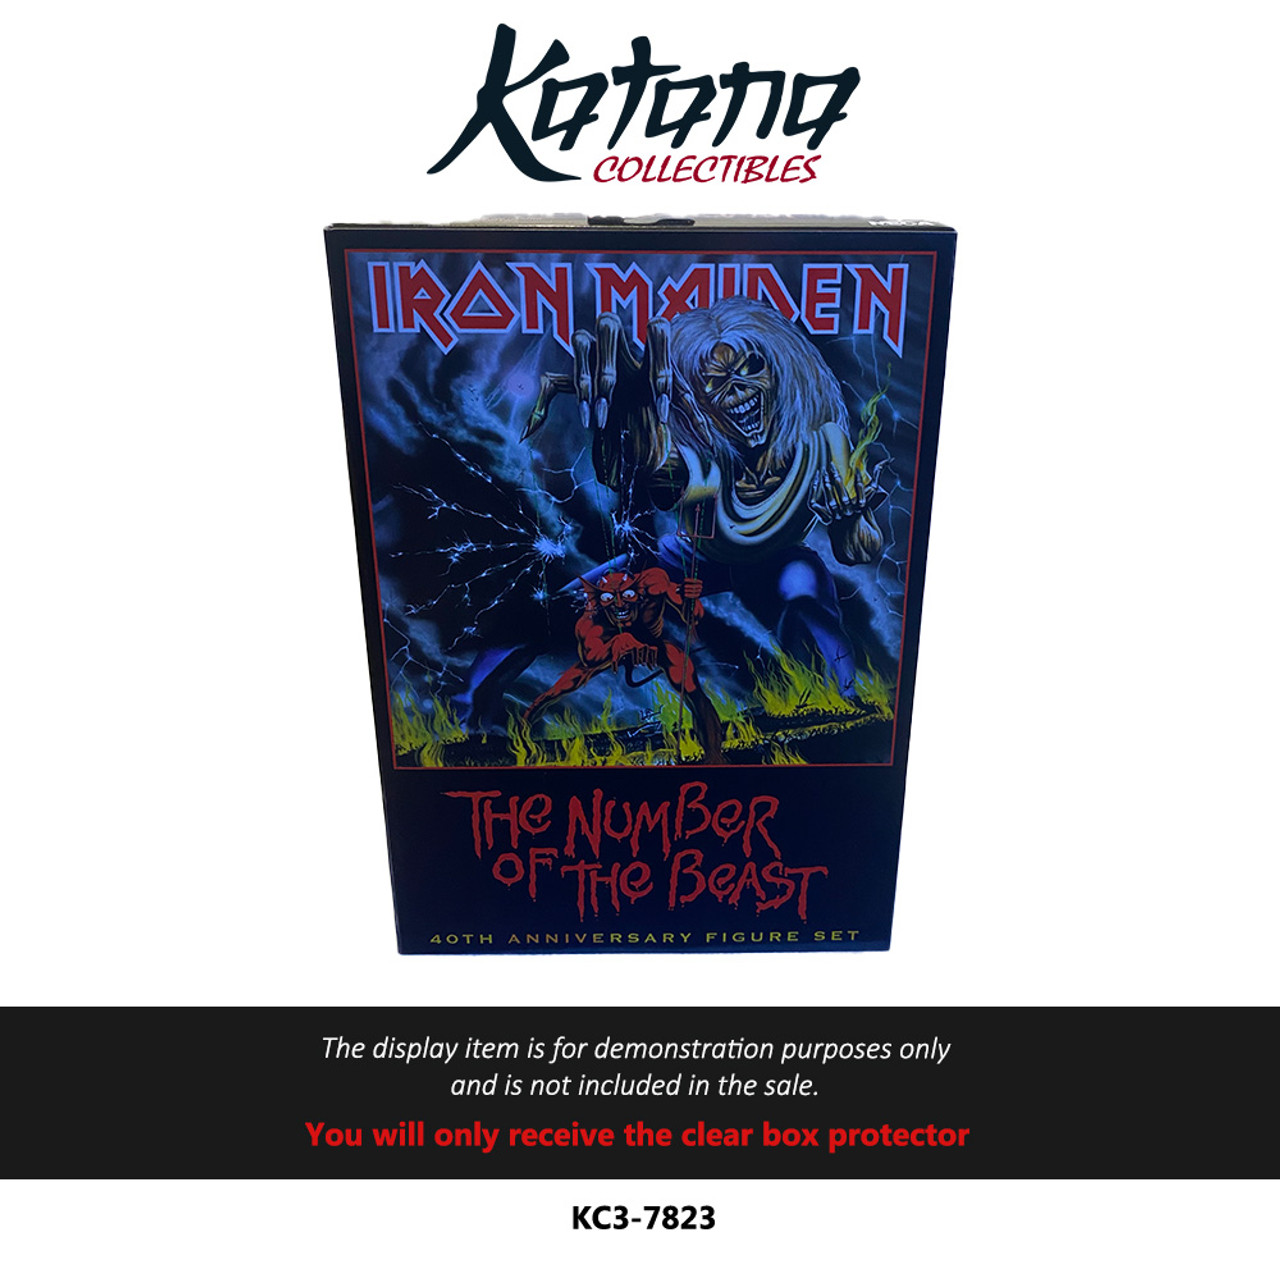 Katana Collectibles Protector For NECA Iron Maiden 7" Scale Action Figure Set Ultimate Number of the Beast (40th Anniversary)